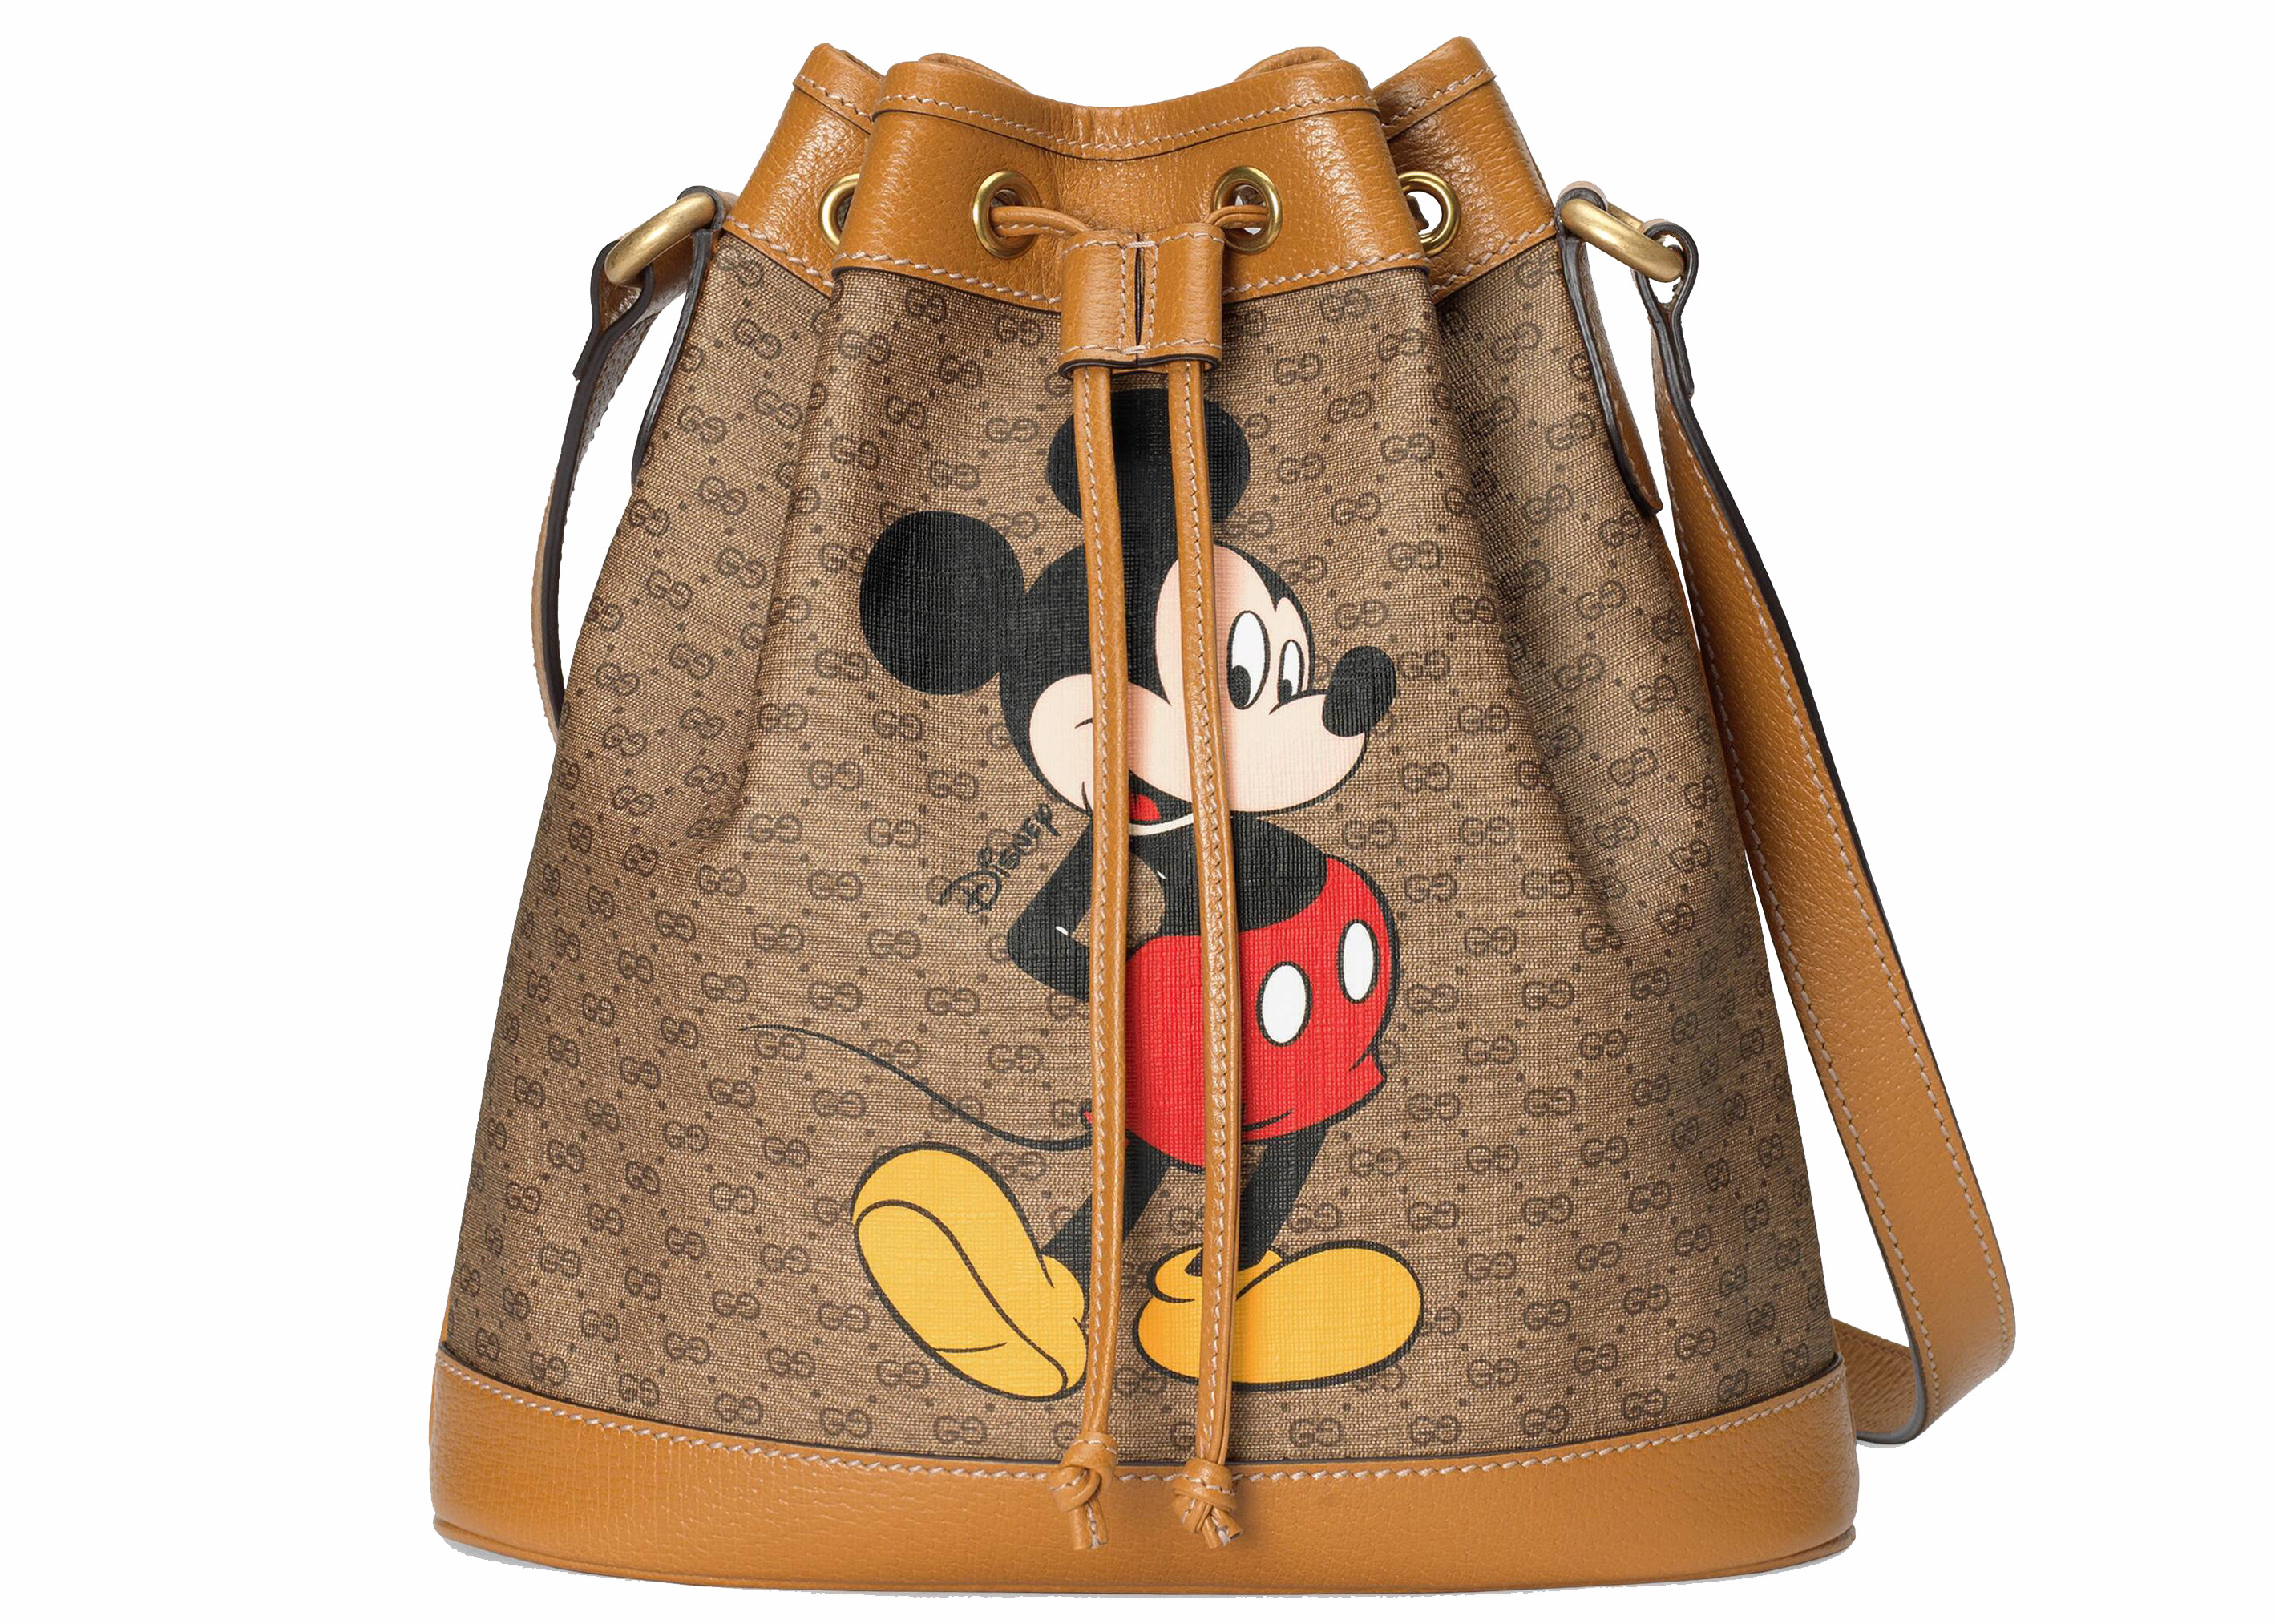 gucci mickey mouse bags